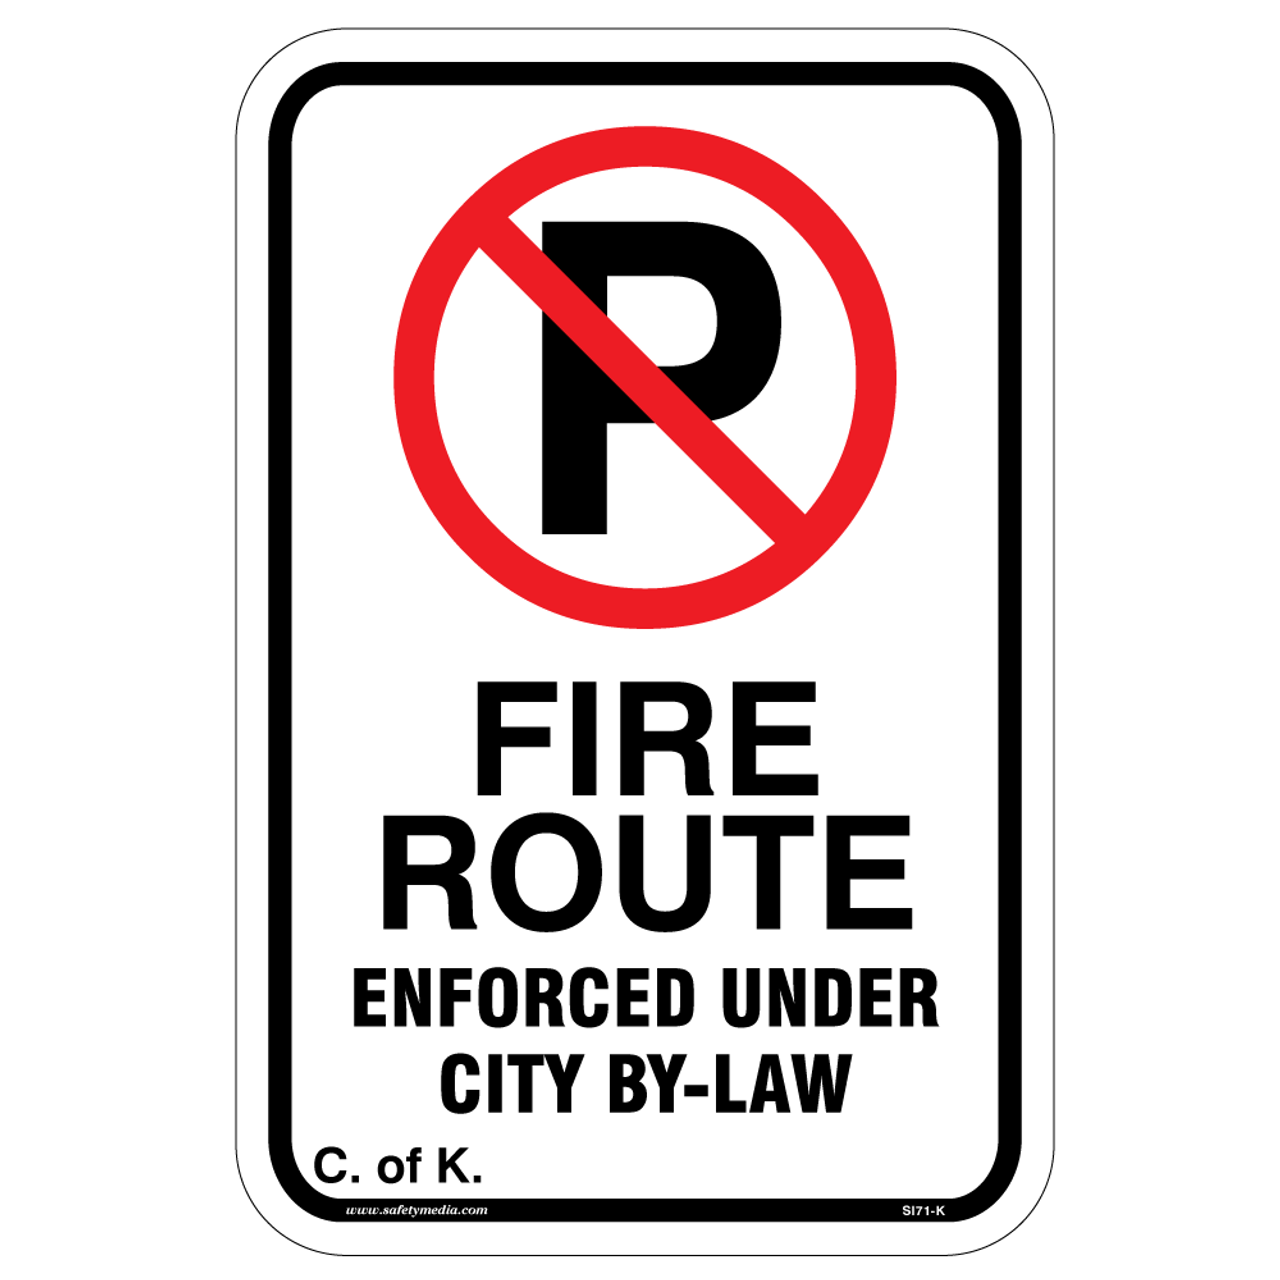 Fire Route Enforced Under City By-Law